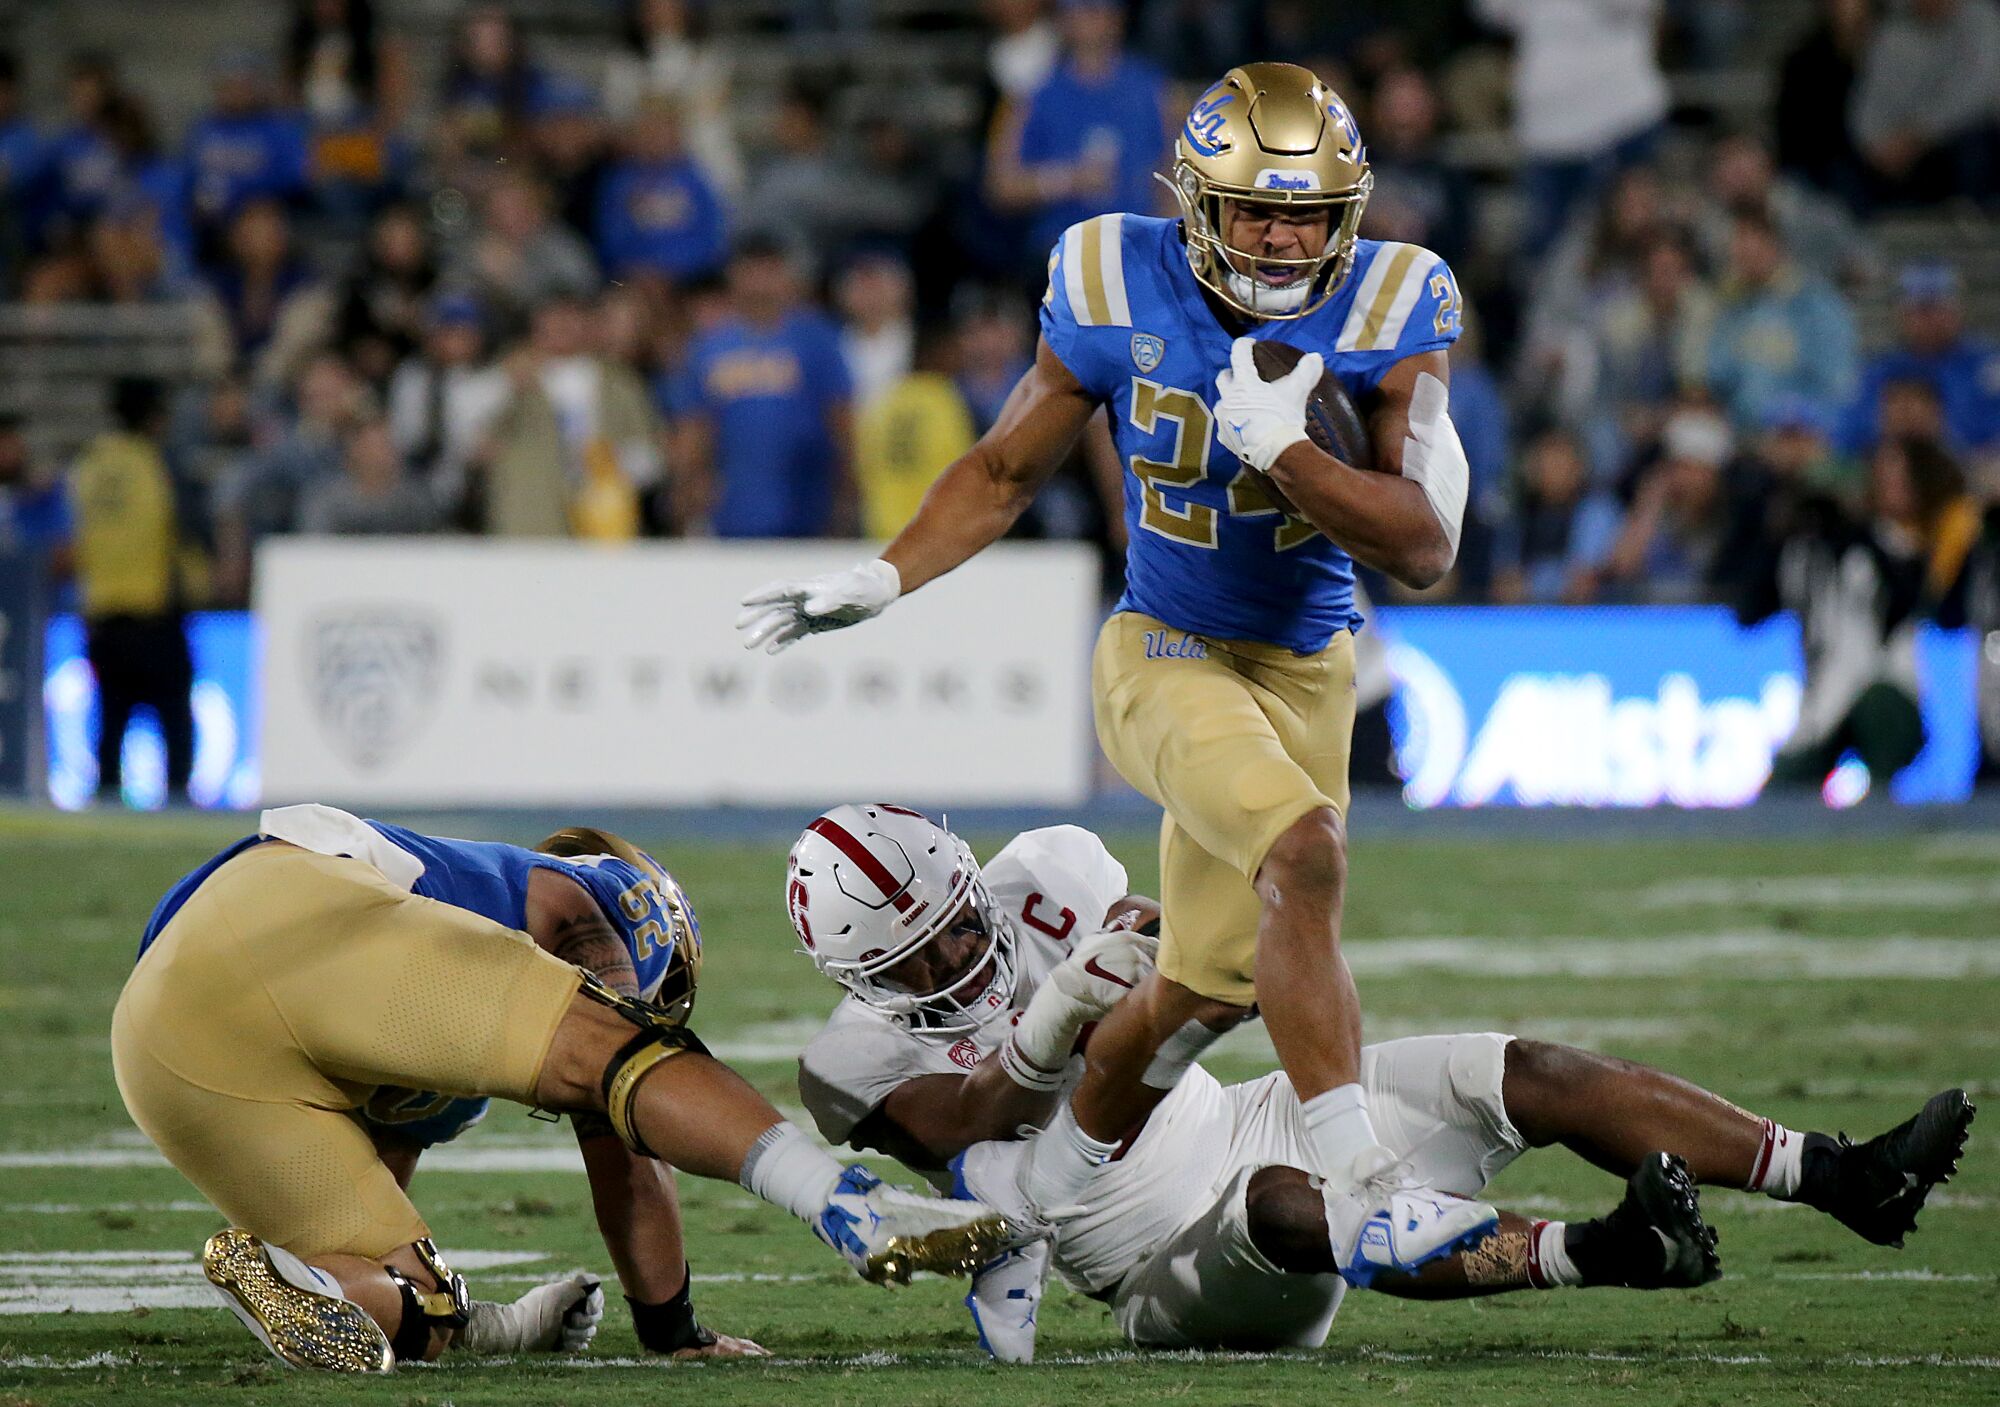 UCLA running back Zach Charbonnet breaks away from Stanford tacklers for a big rushing gain